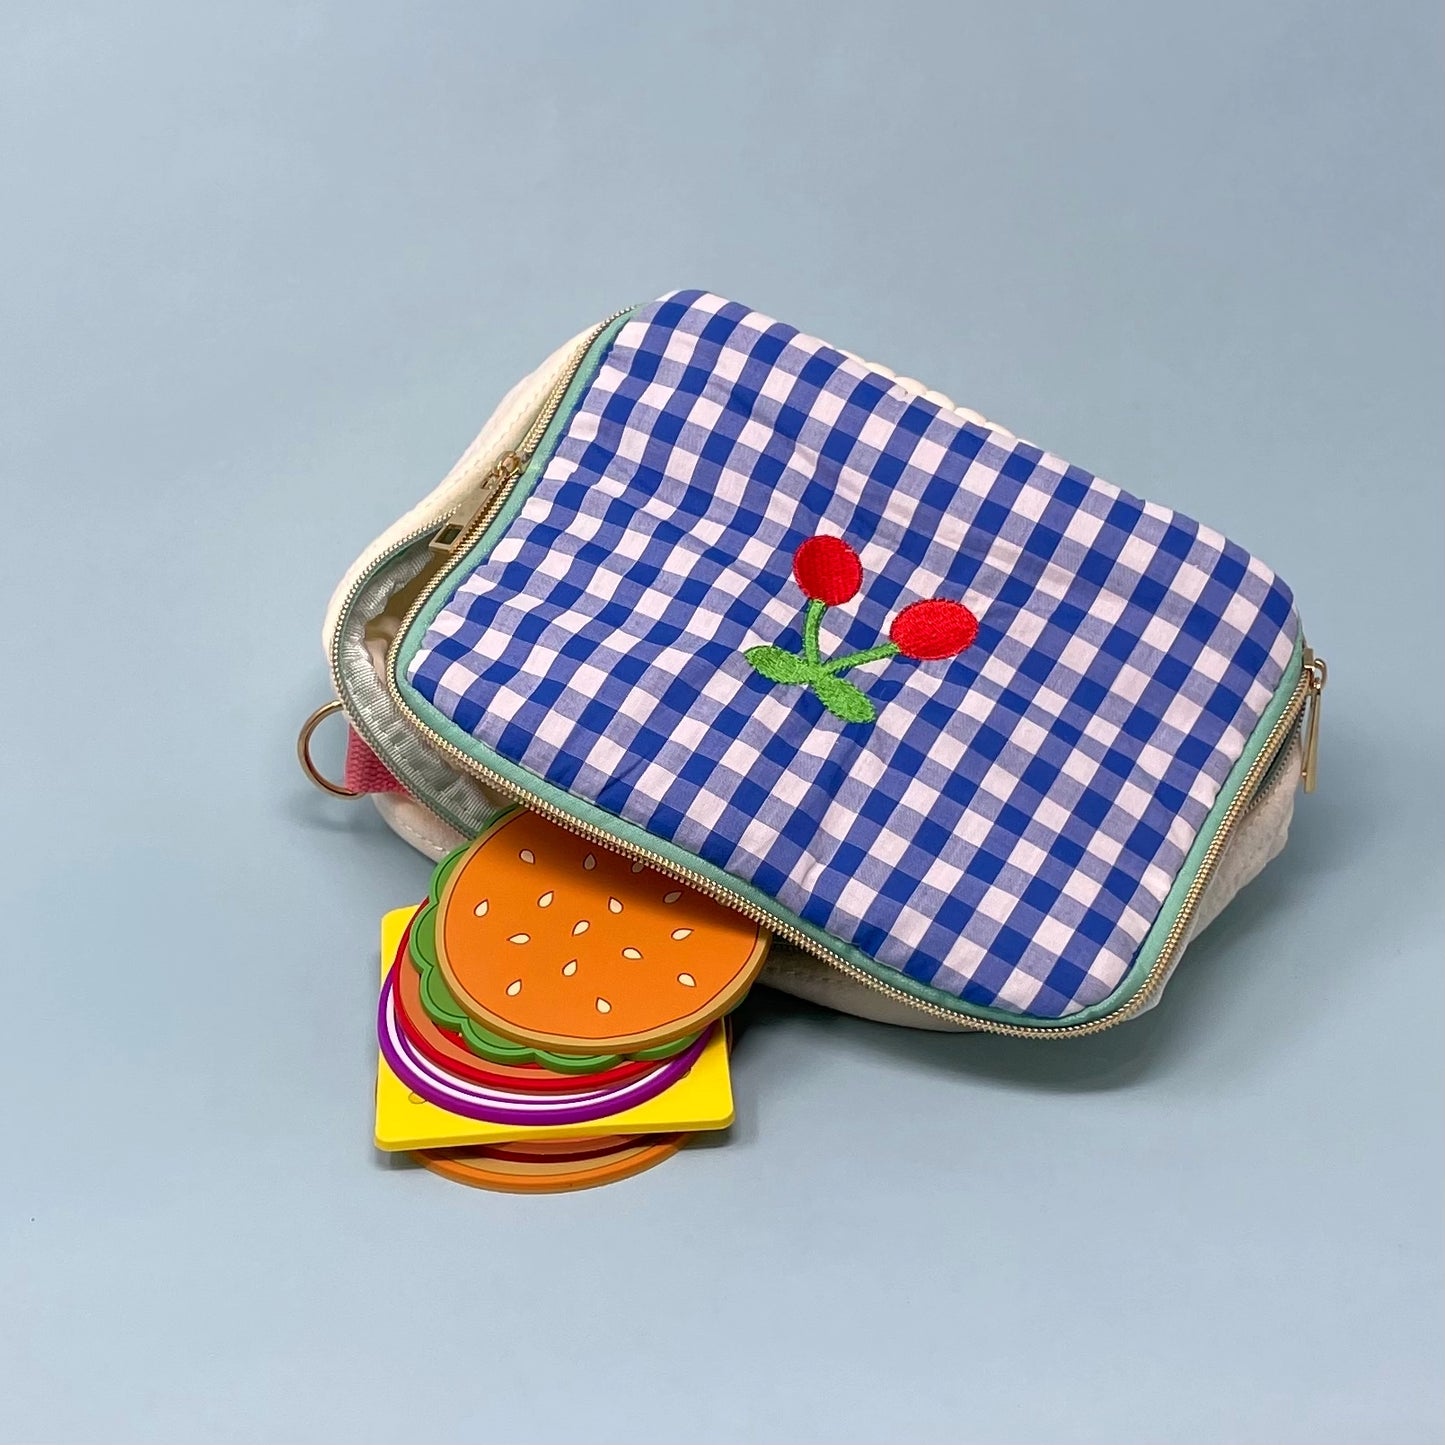 Little blue checkered bag with a cherry on it unzipped to reveal an 8pcs cheeseburger coaster set.